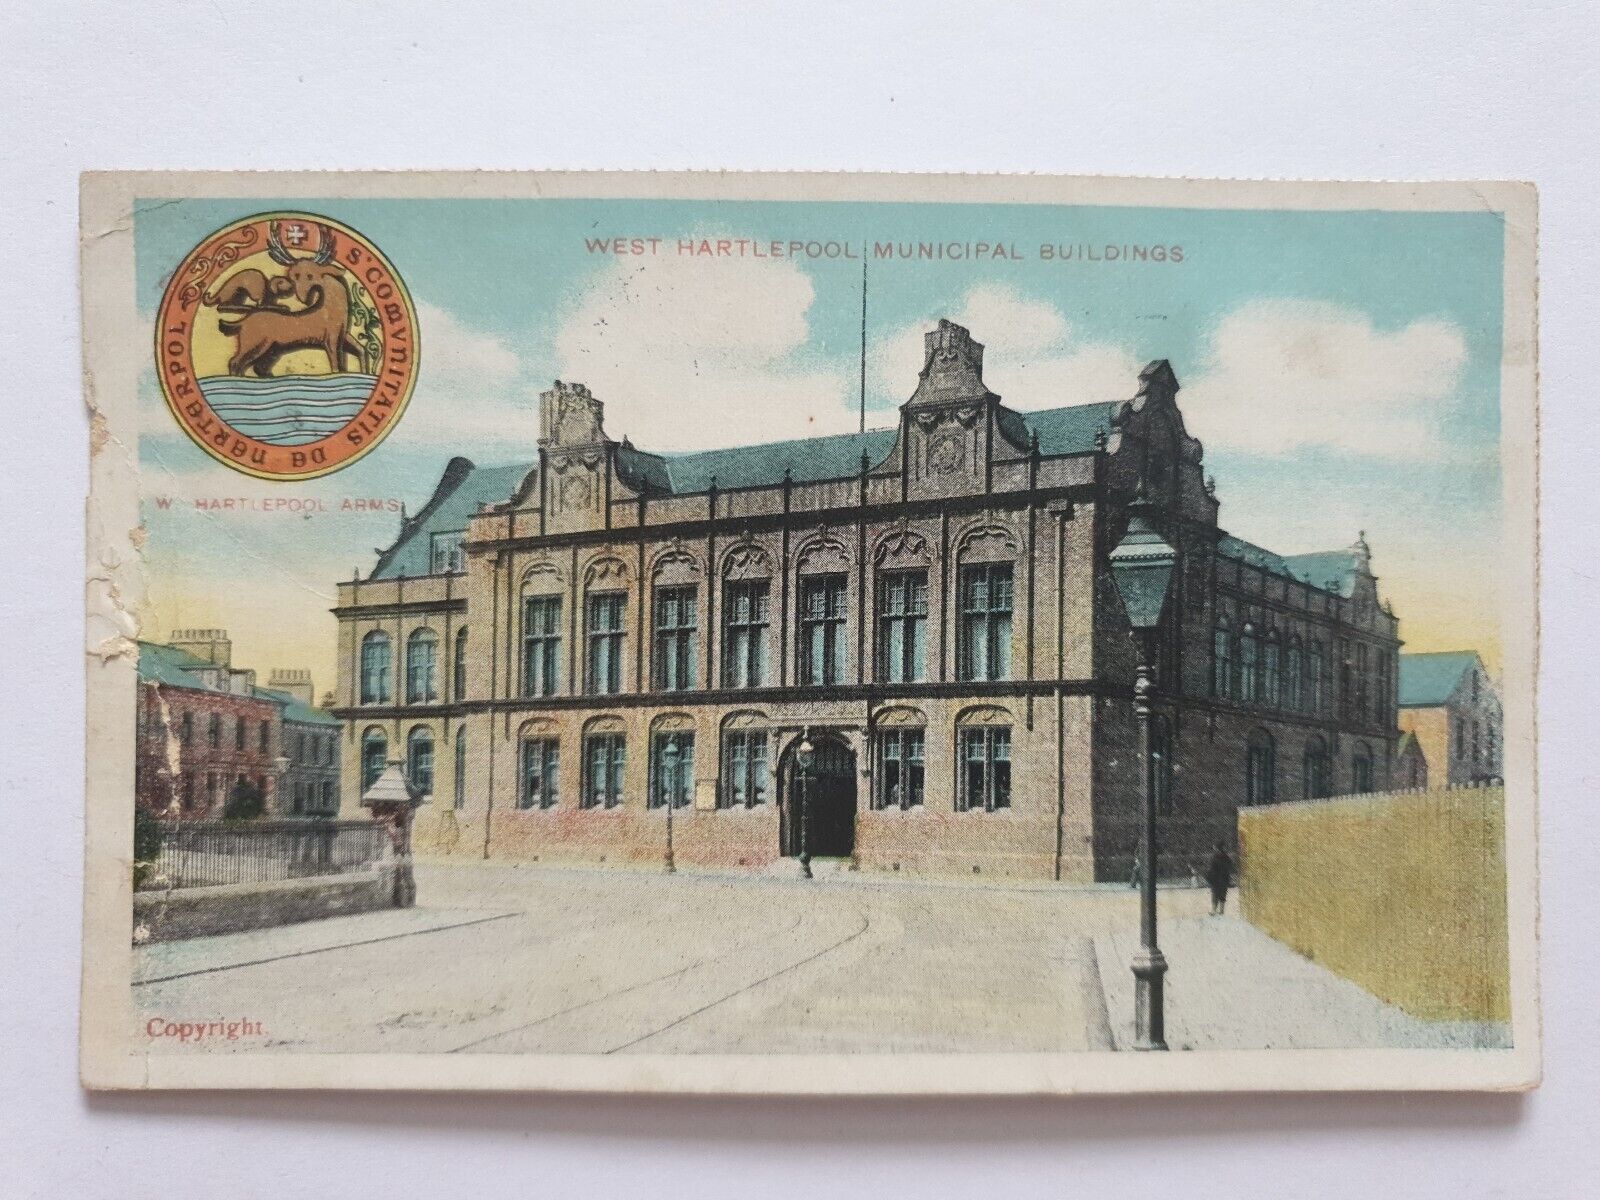 House Clearance - West Hartlepool Municipal Buildings, Durham, Old Service, Hartlepool Arms 1910s